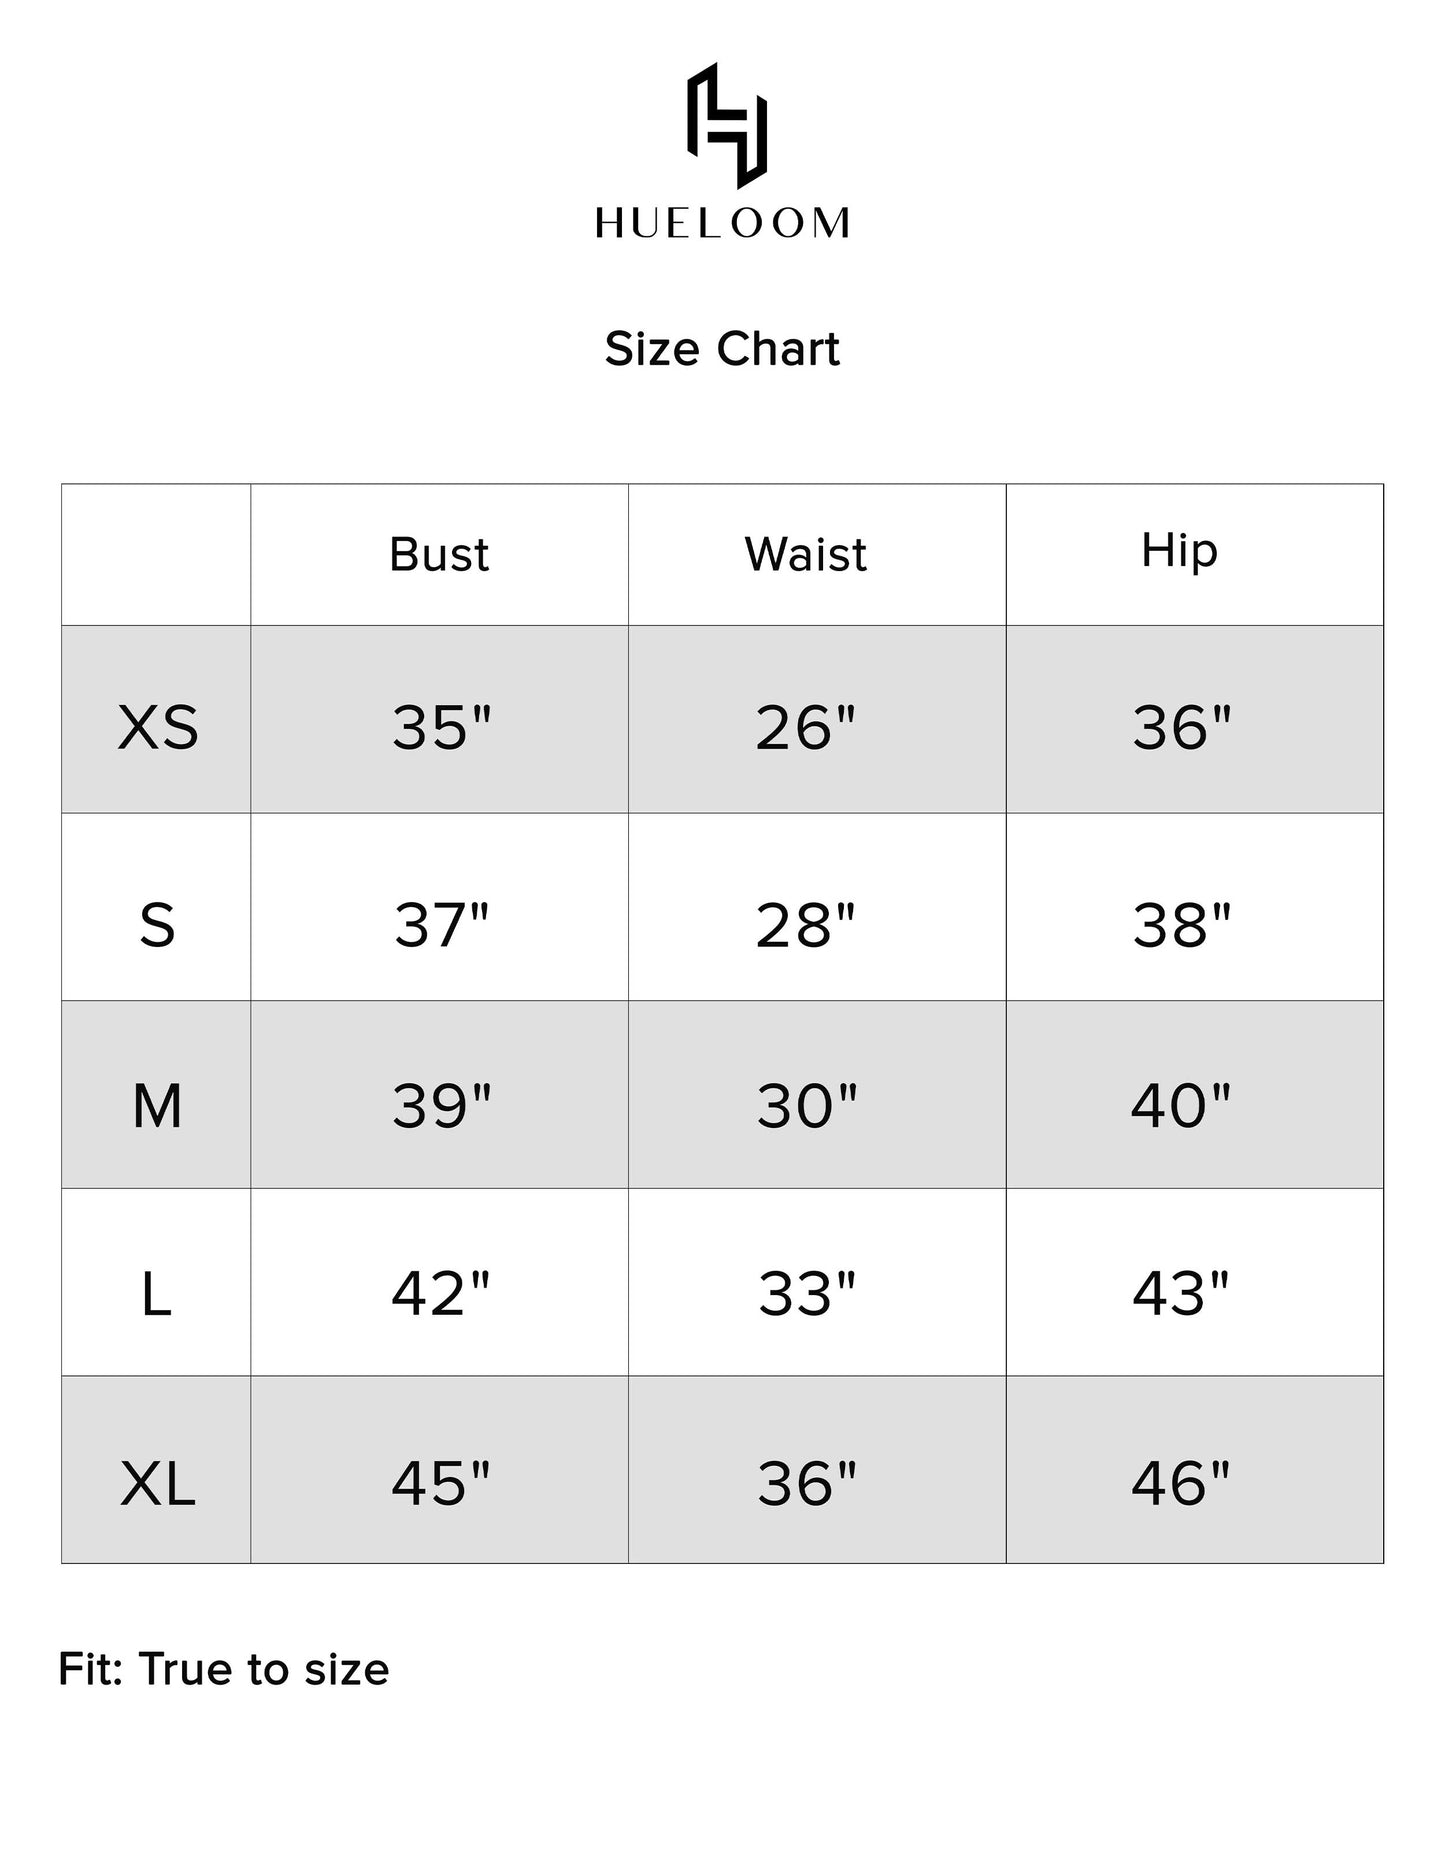 Hueloom wardrobe ally capsule size chart display for accurate sizing.